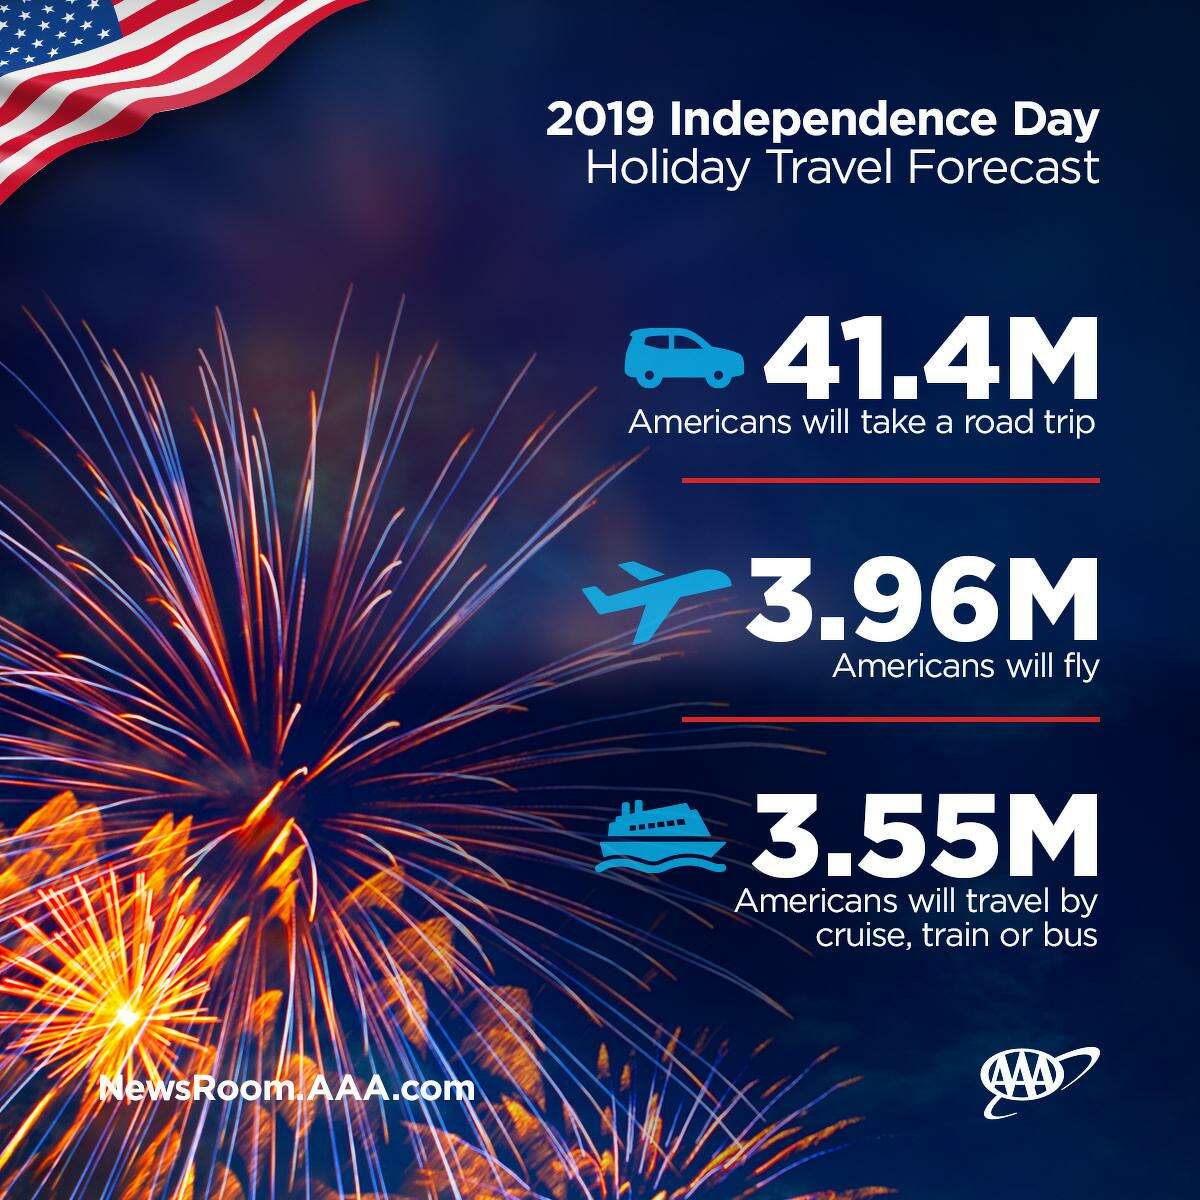 Those who plan to travel over the coming Fourth of July holiday will find a lot of company on the roads, with more than 49 million Americans are planning a holiday getaway this year, according to AAA.